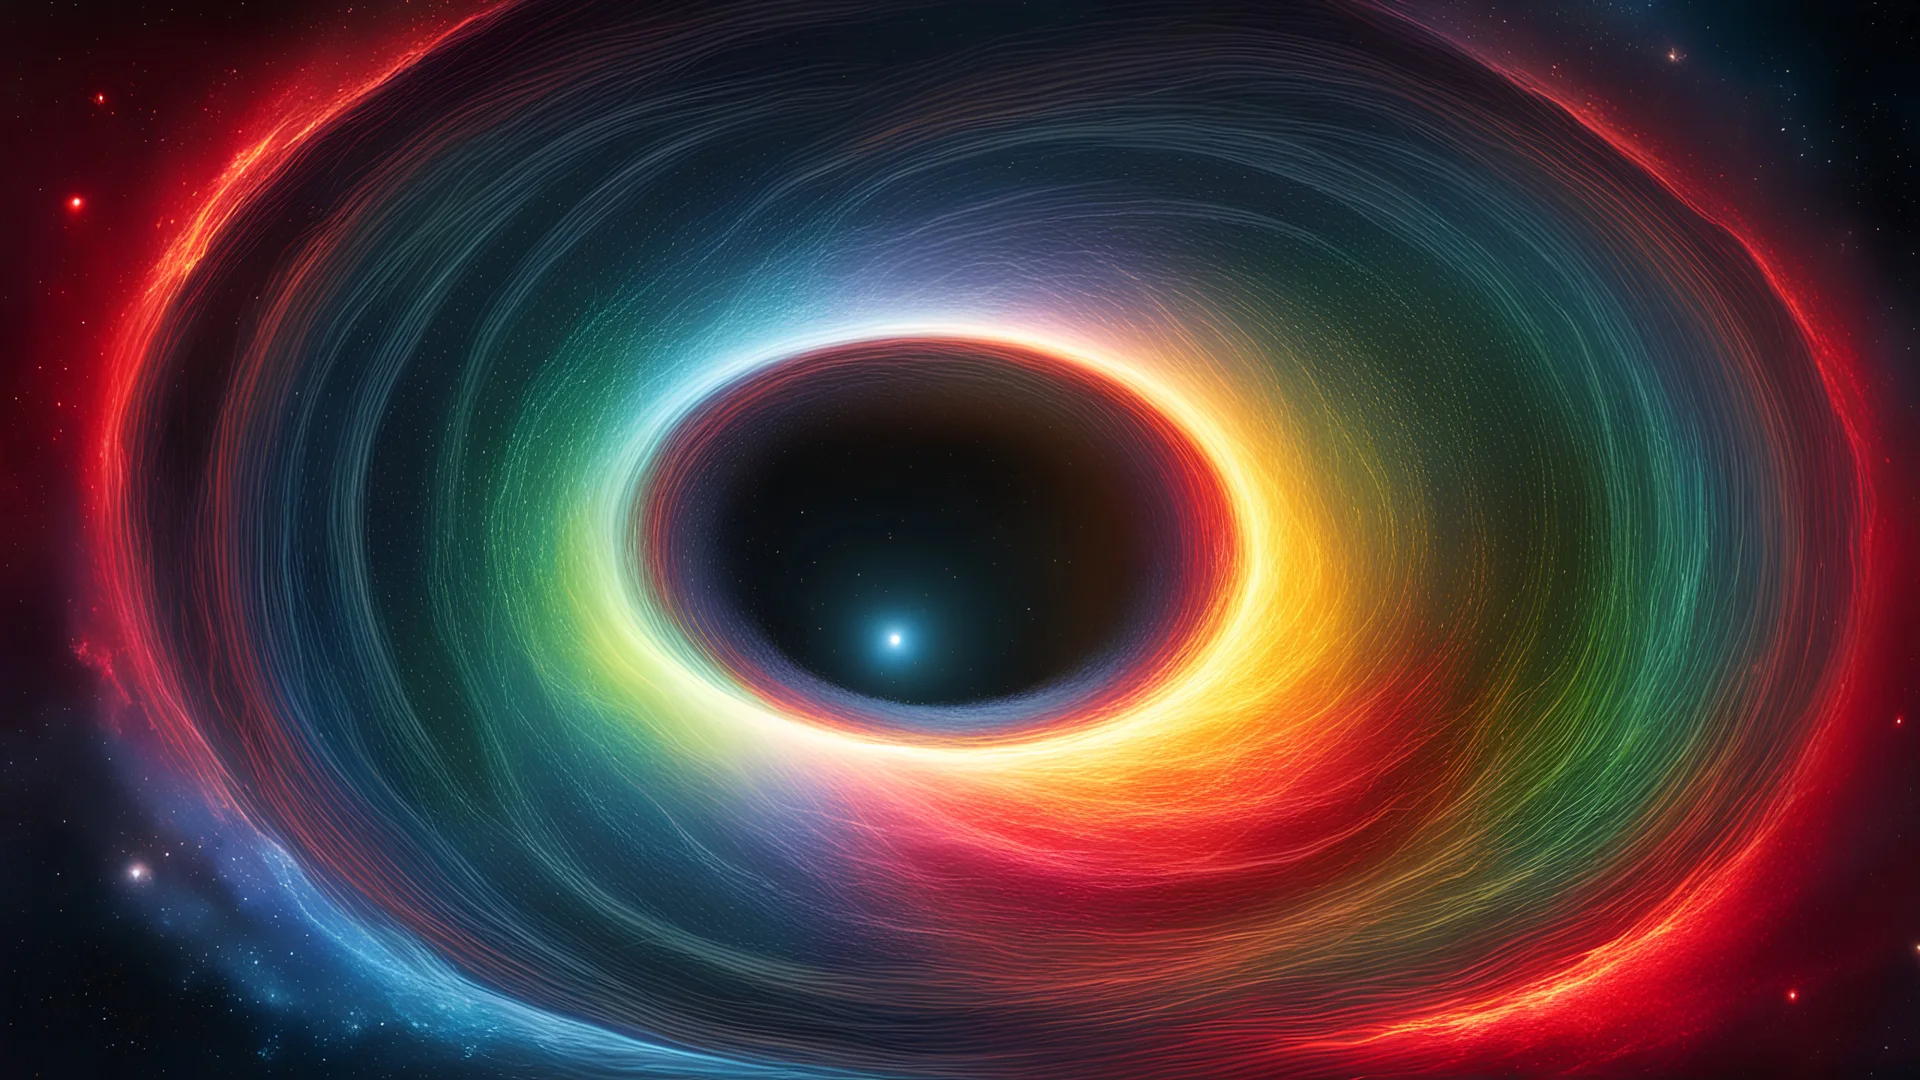 a wormhole portal to another universe in colors red,green,yellow and blue